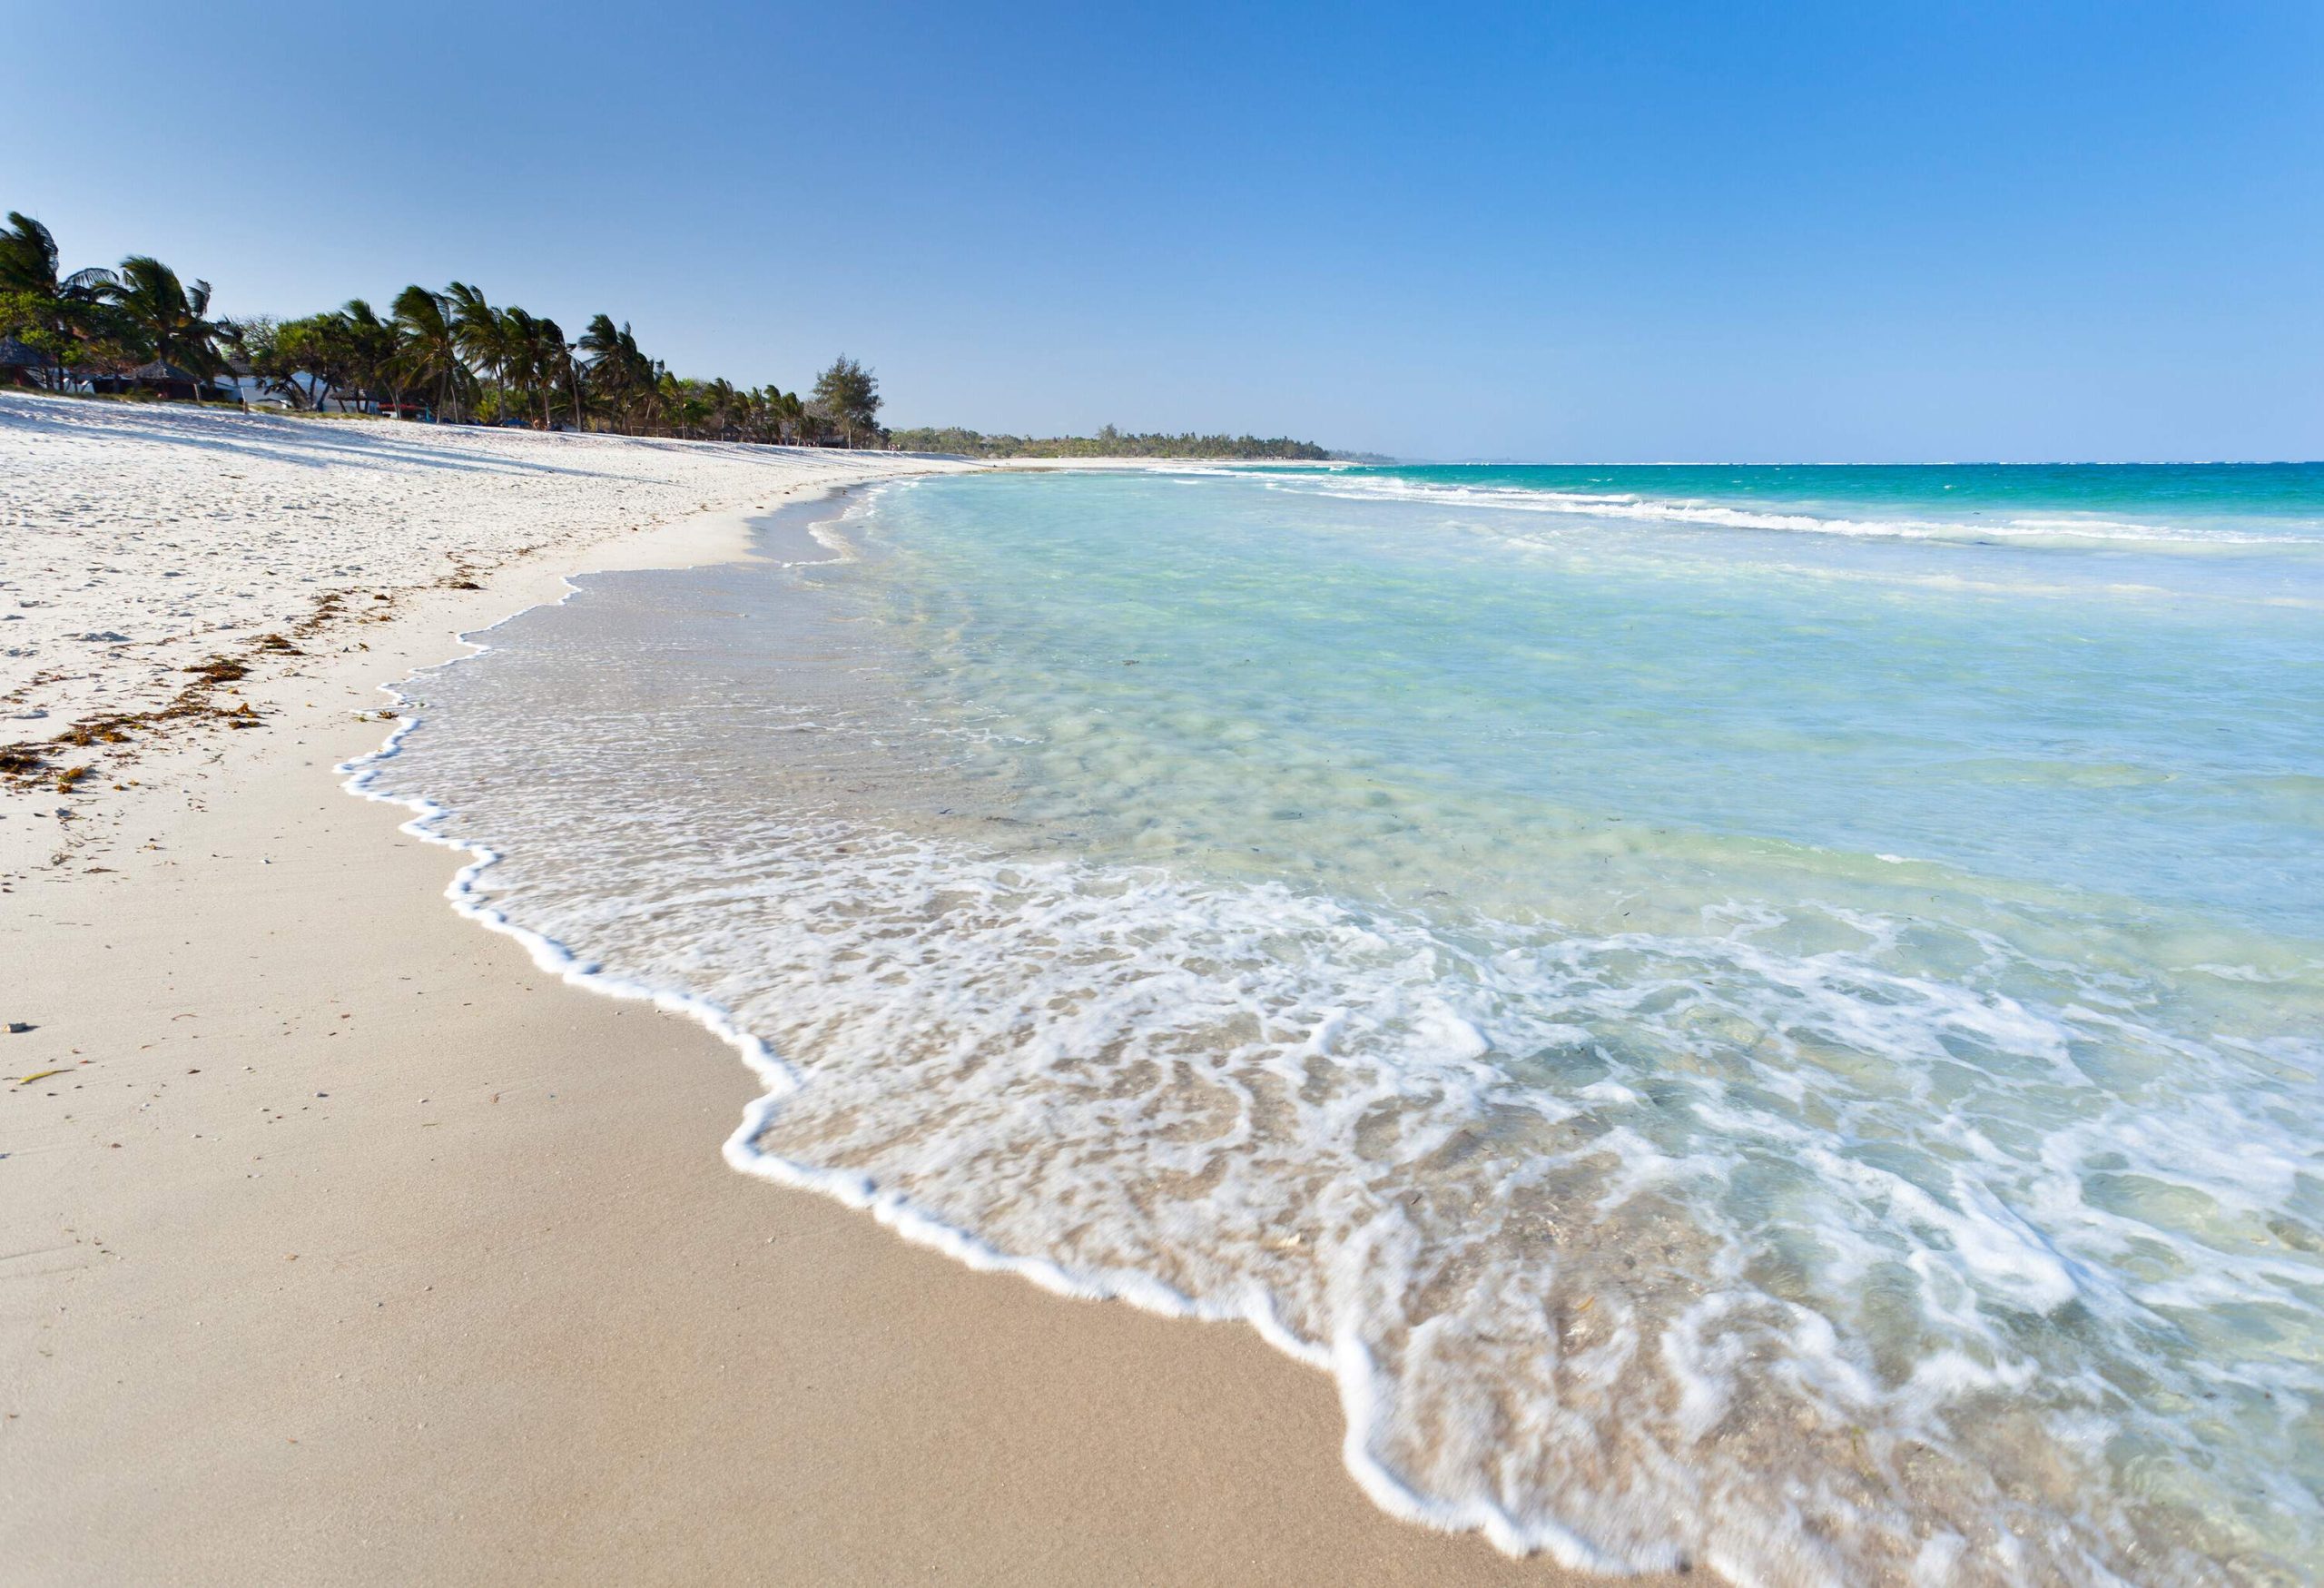 A white sand beach with gentle waves and distant views of palm trees.